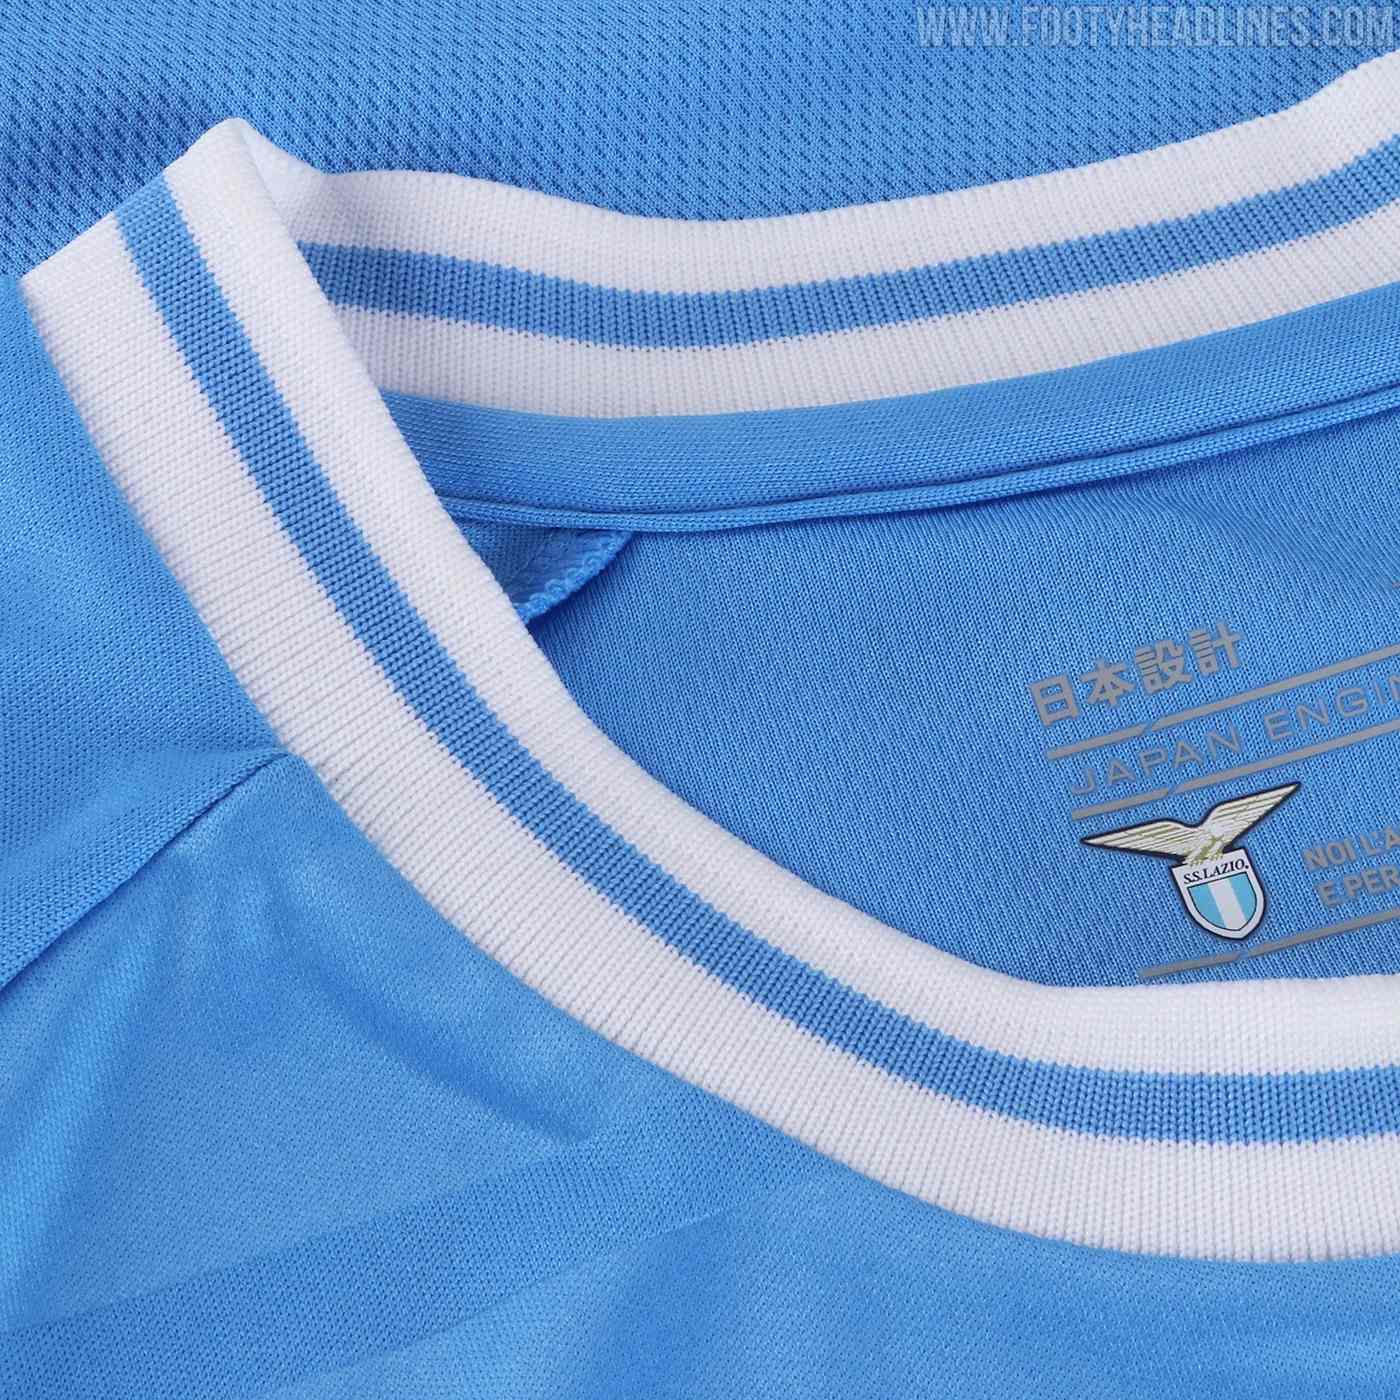 Mizuno & Lazio Commence Partnership With 22/23 Home & Away Shirts -  SoccerBible